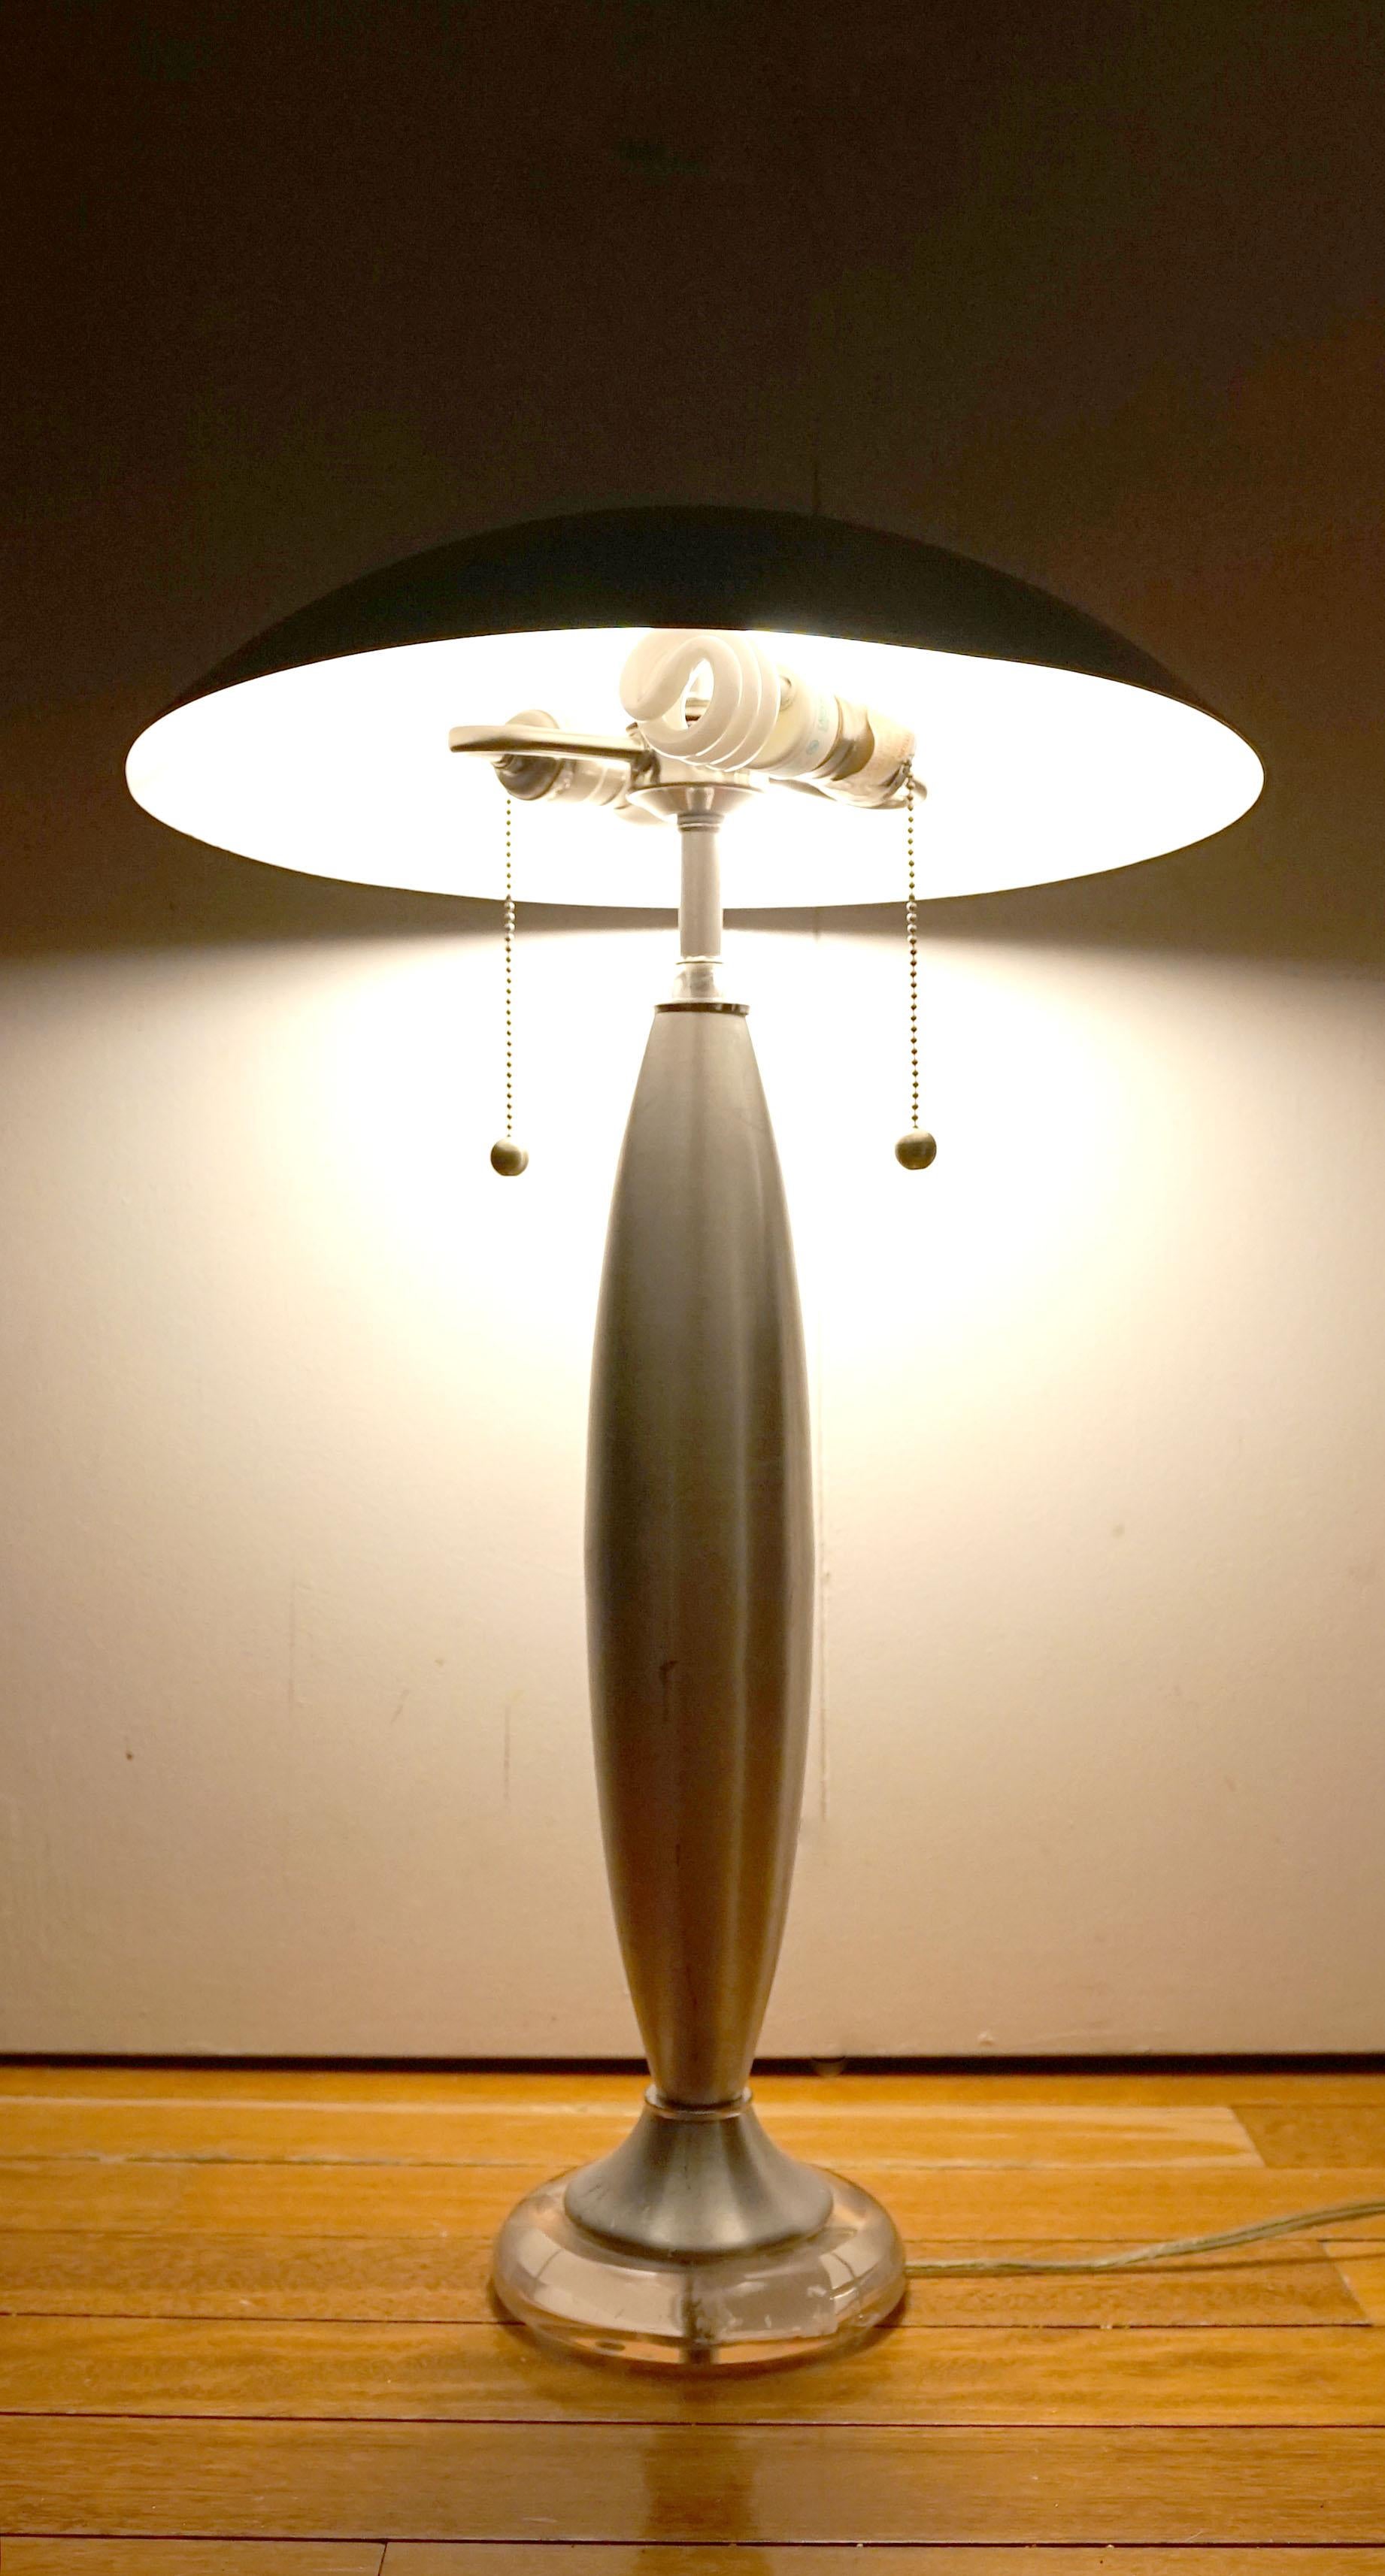 Vintage Domed Brushed Steel, Chrome Table Lamp in the Style of Laurel Lamp Co In Good Condition For Sale In Lomita, CA